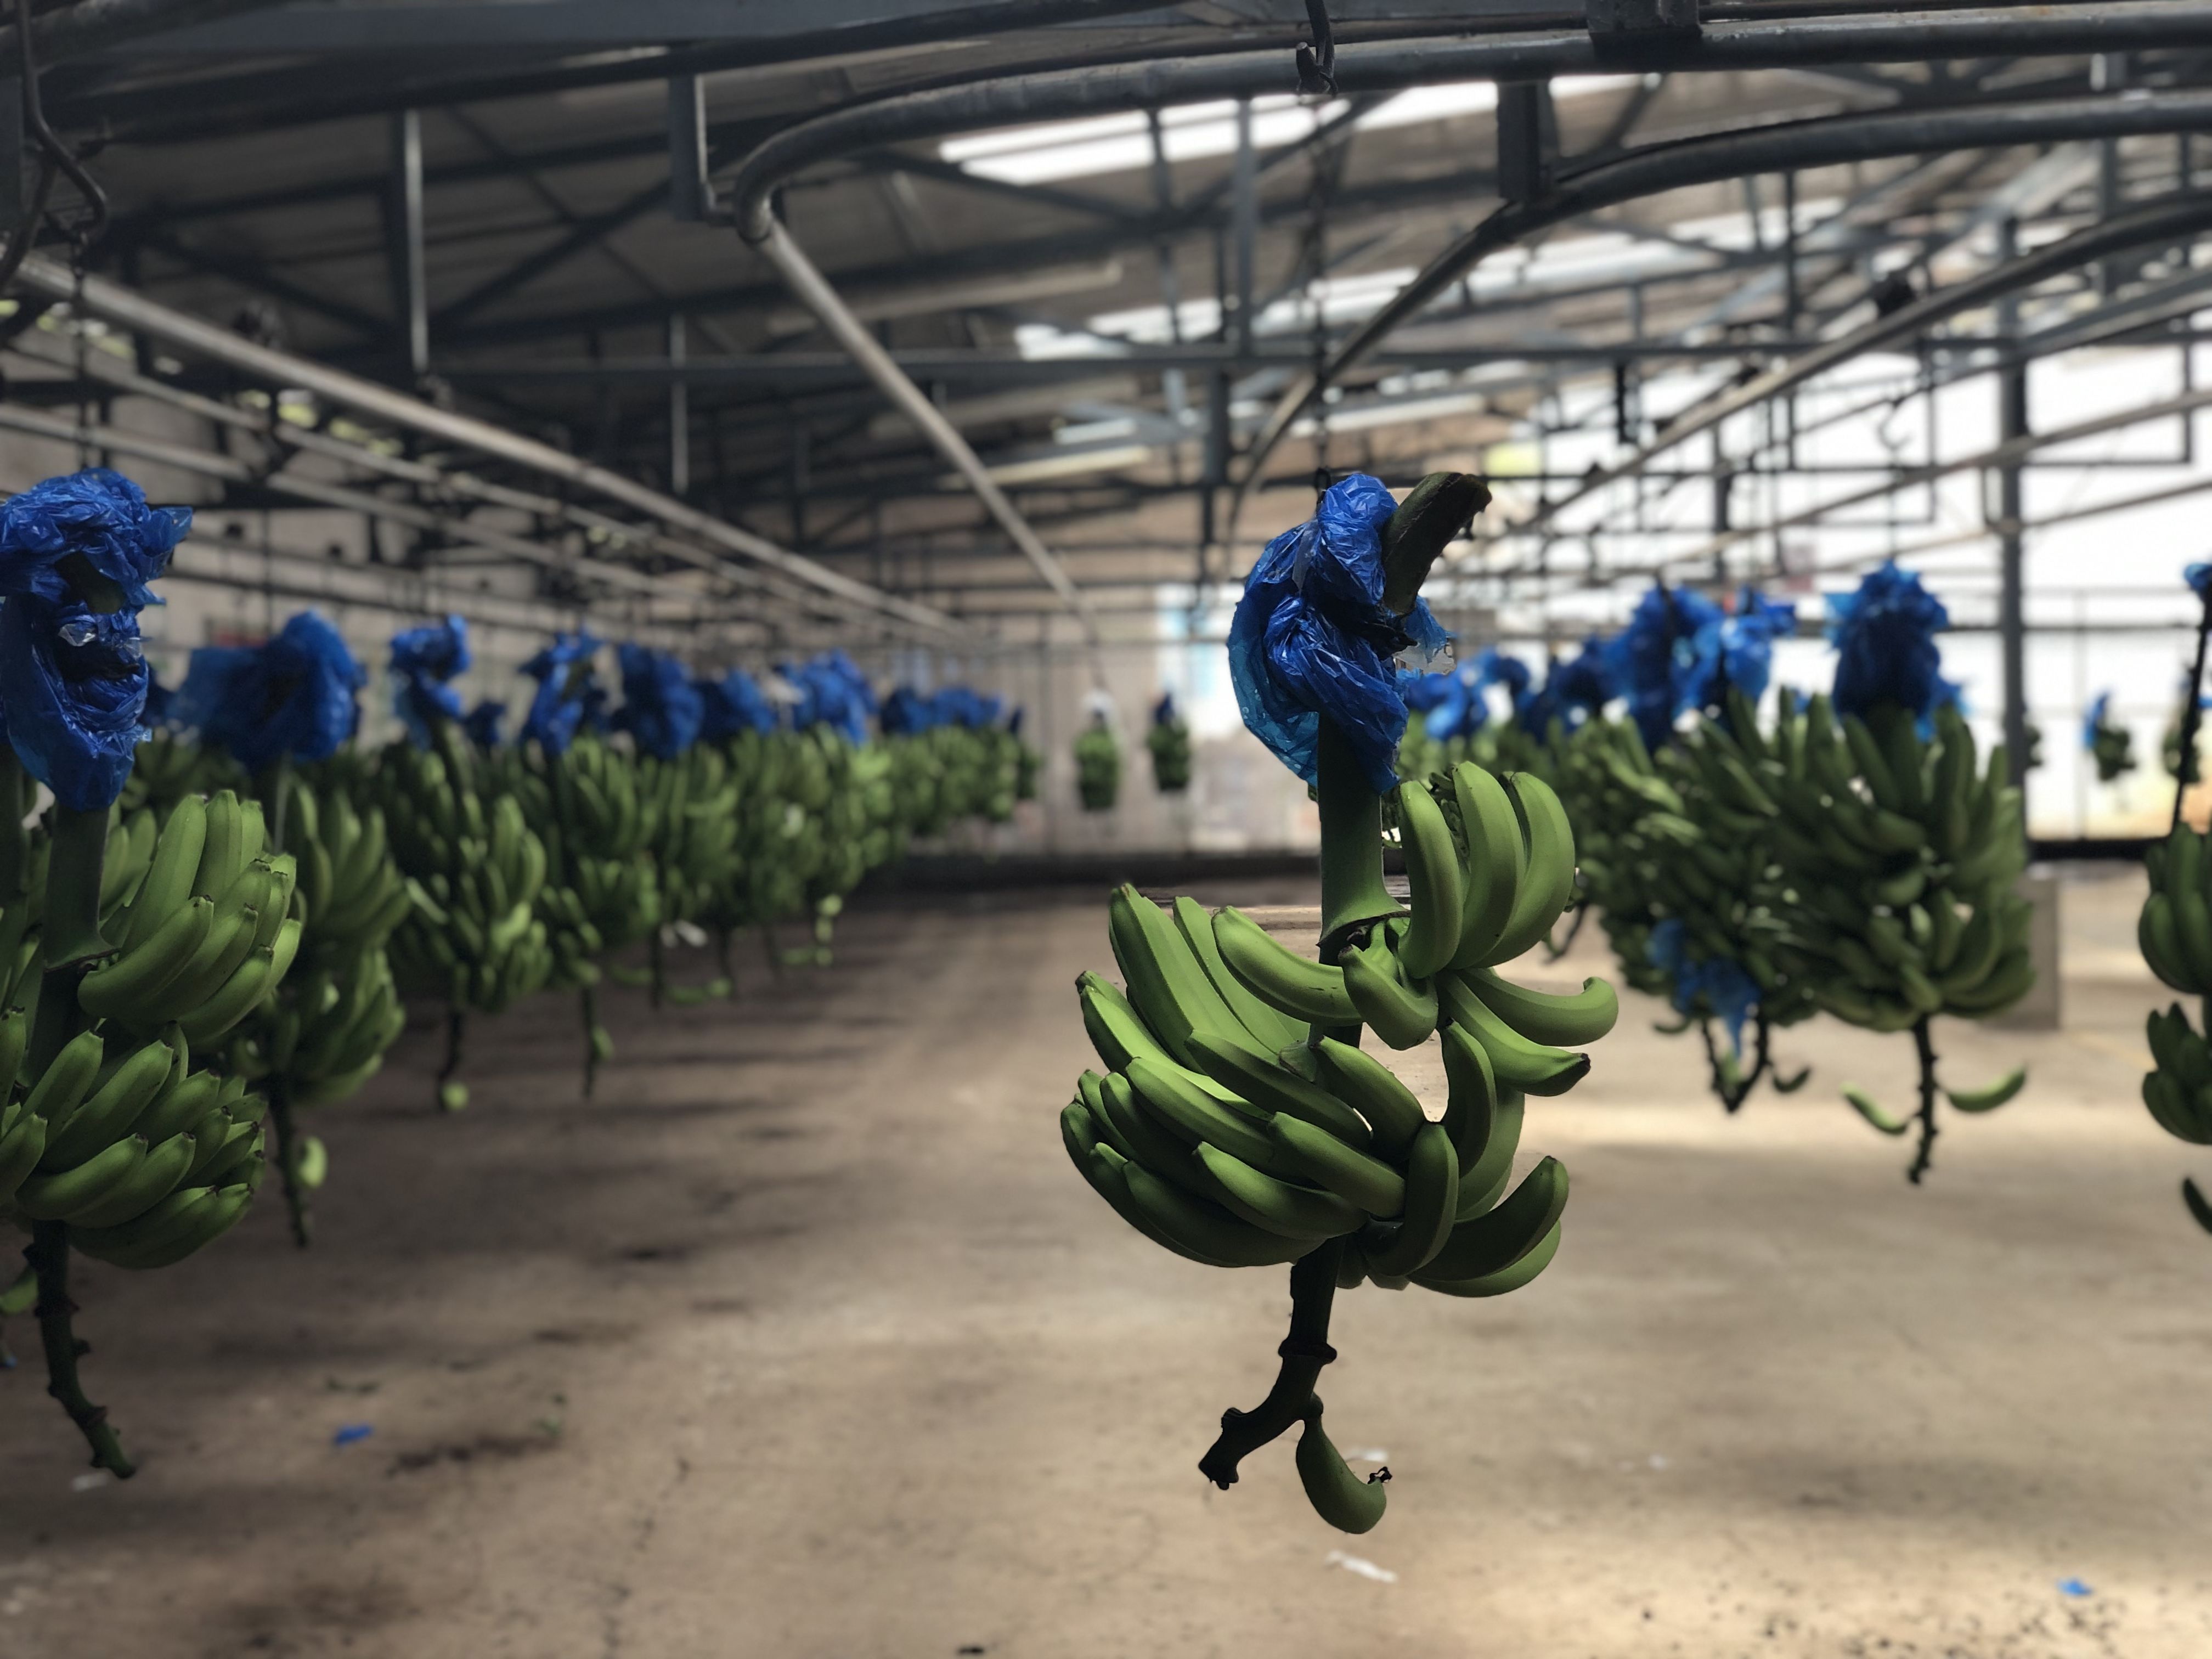 The insecticidal bags are removed from the bananas in the processing facility at Rio Sixaola Plantation. Image by Madison Stewart. Costa Rica, 2019. 